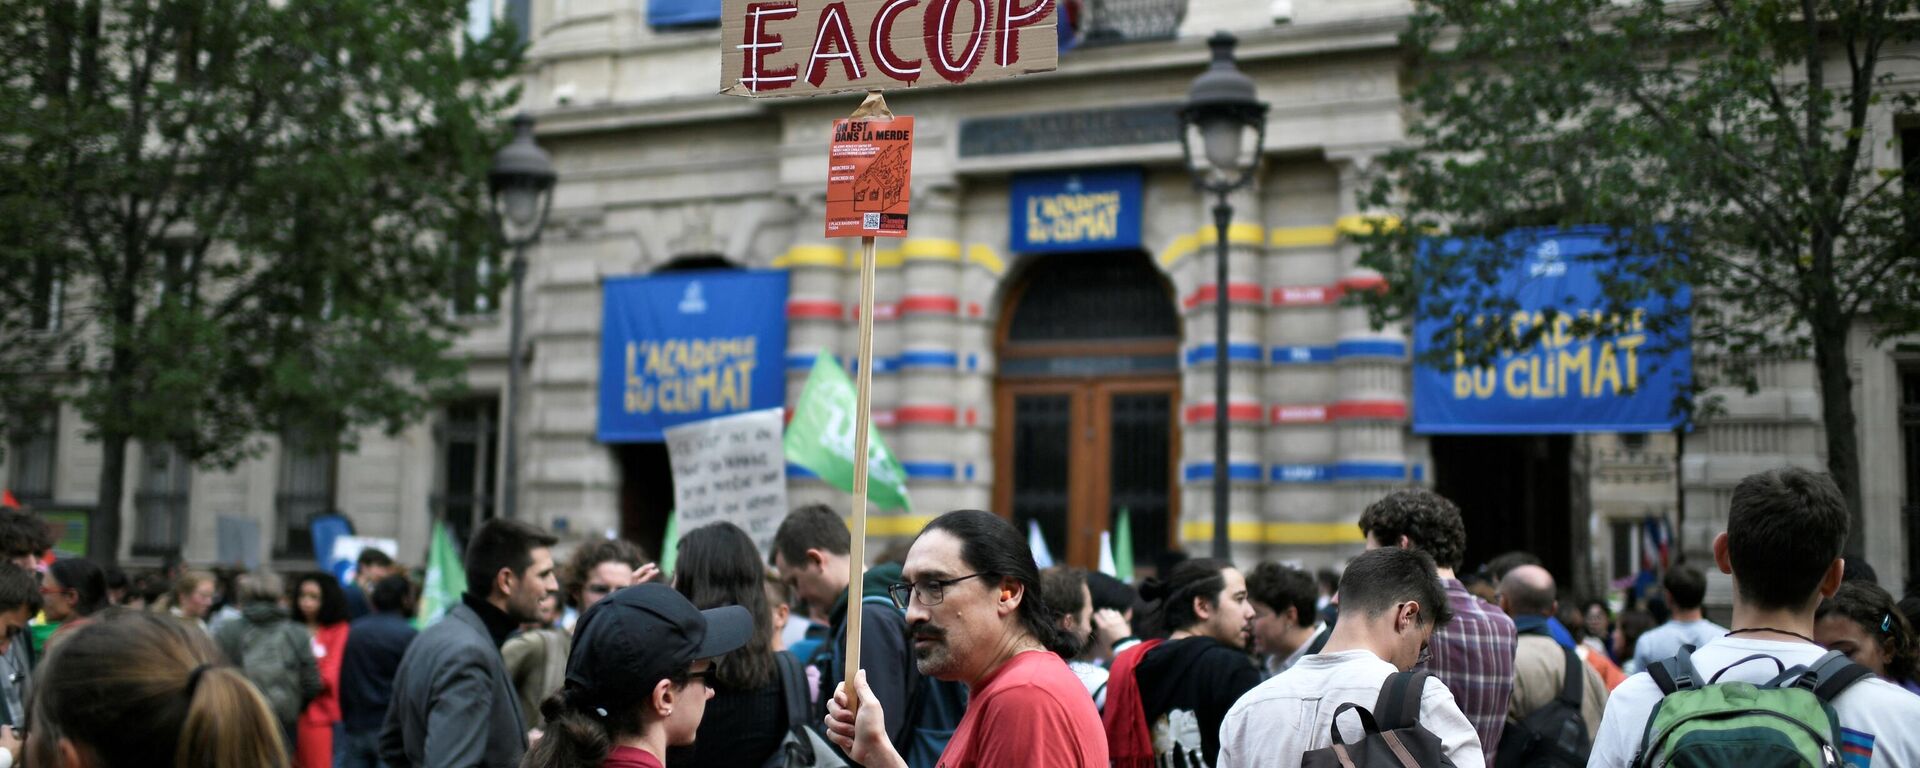 An activist holds a STOP EACOP placard opposing a pipeline project during an action as part of the La Voix Lyceenne (High School Voice) union initiative in Paris on September 23, 2022. - According to the EU Parliament on September 15, 2022, more than 100,000 people are at risk of being displaced by the East Africa Crude Oil Pipeline (EACOP) of France's TotalEnergies and the China National Offshore Oil Corporation (CNOOC) that signed a $10-billion agreement earlier in 2022 to develop Ugandan oilfields and ship the crude through a 1,445-kilometre (900-mile) pipeline to Tanzania's Indian Ocean port of Tanga. (Photo by STEPHANE DE SAKUTIN / AFP) - Sputnik International, 1920, 26.09.2022